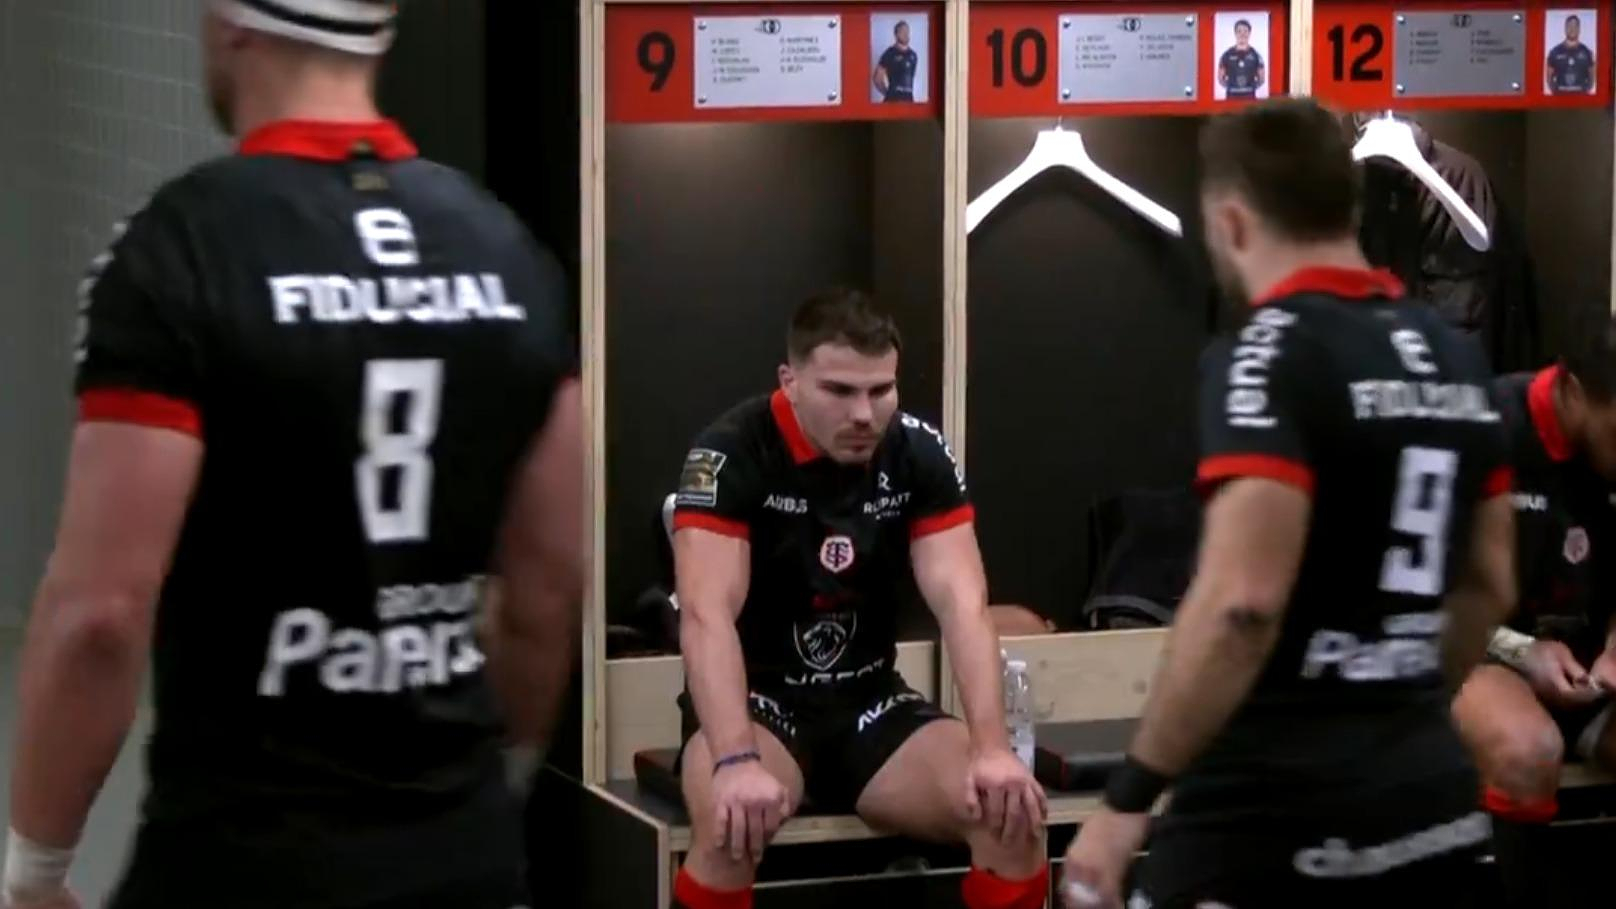 Top 14: Antoine Dupont forgets that he is playing ten and is called to order (video)